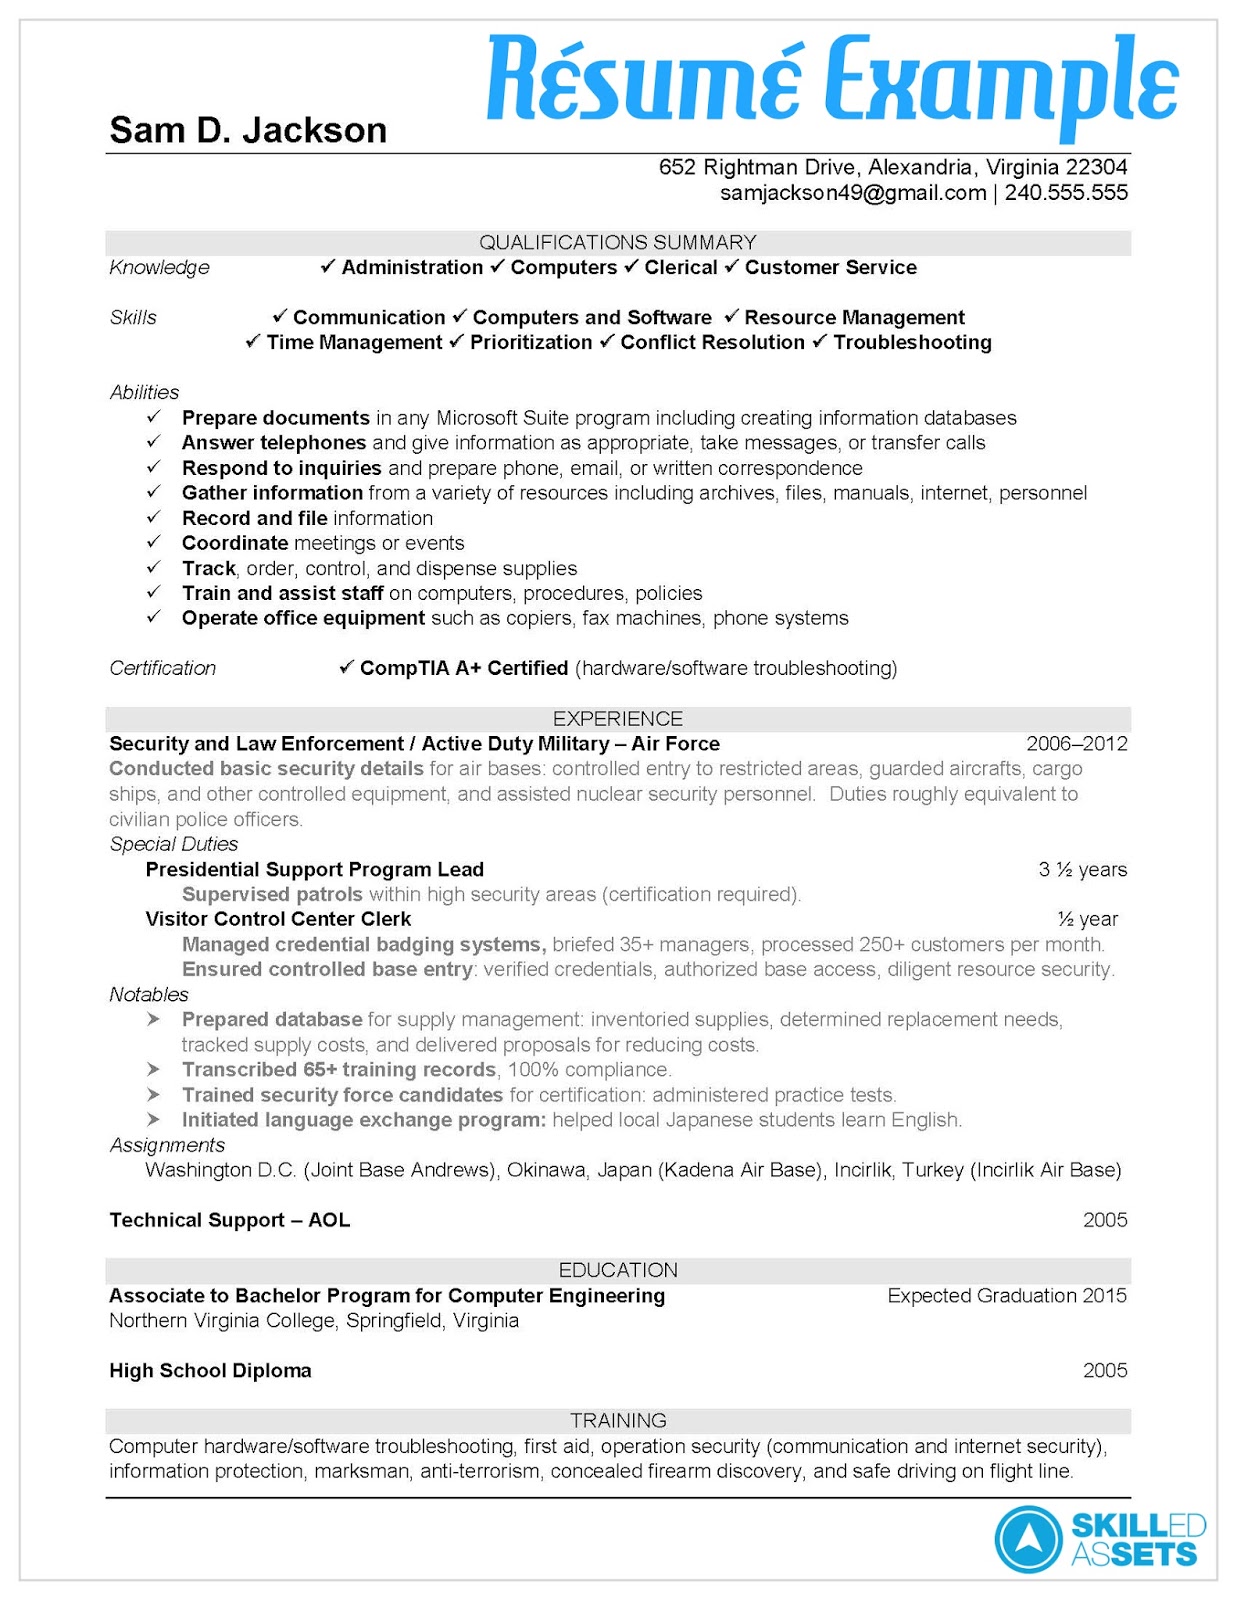 Email when attaching resume and cover letter